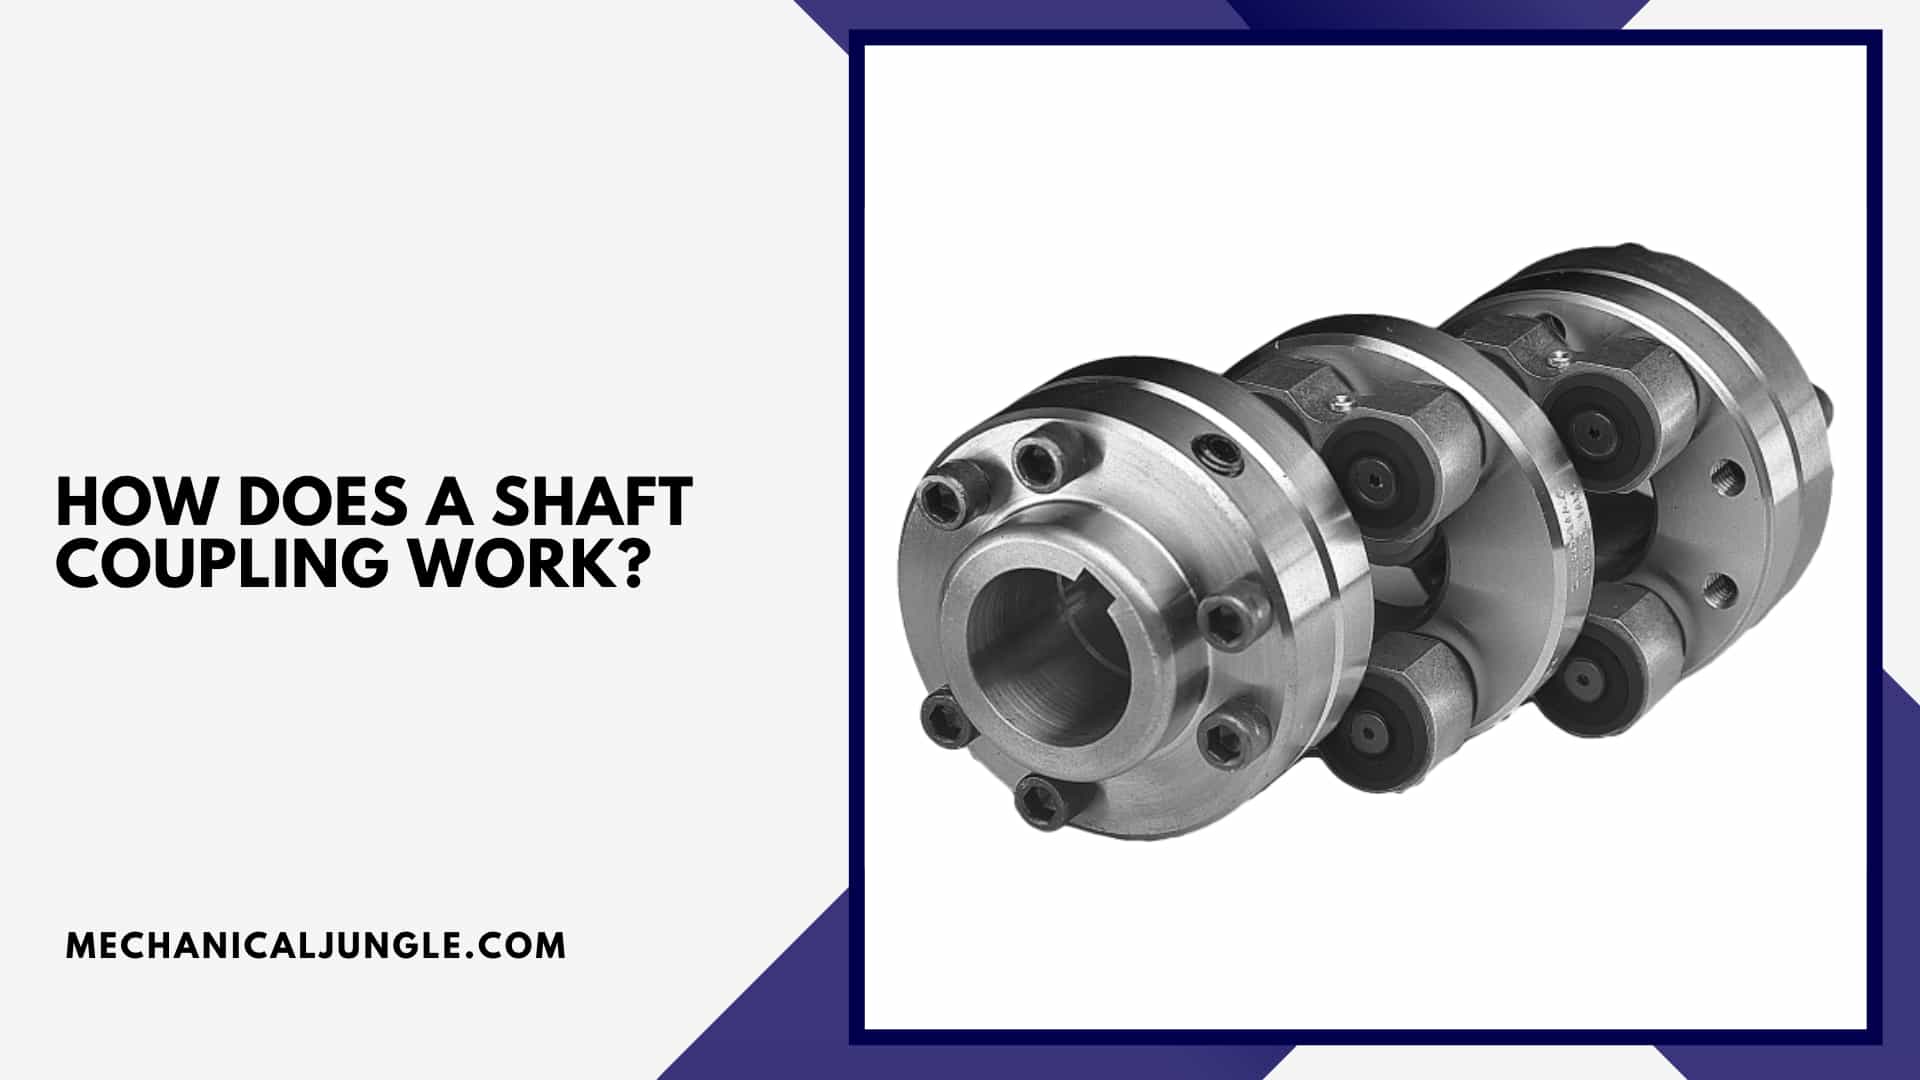 How Does a Shaft Coupling Work?